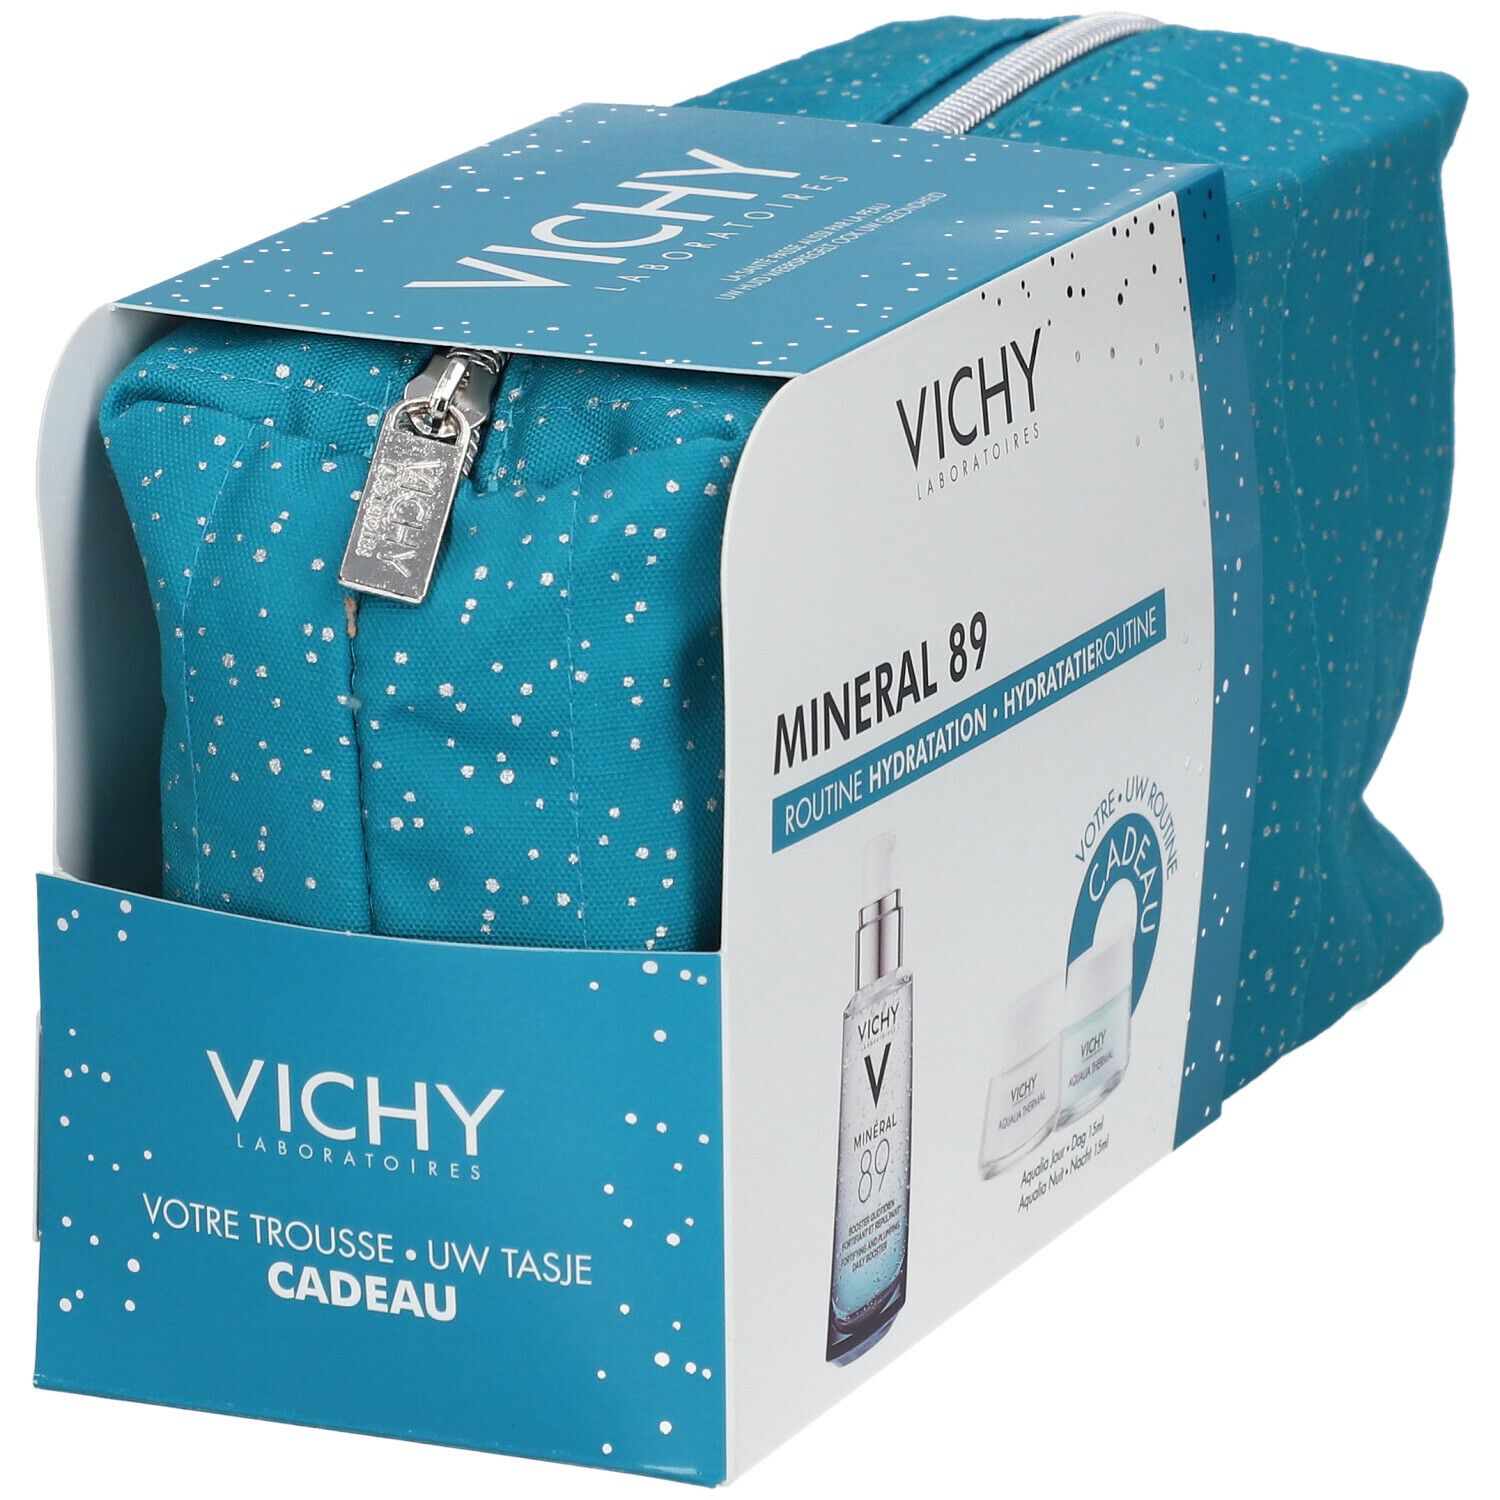 VICHY Trousse Mineral 89